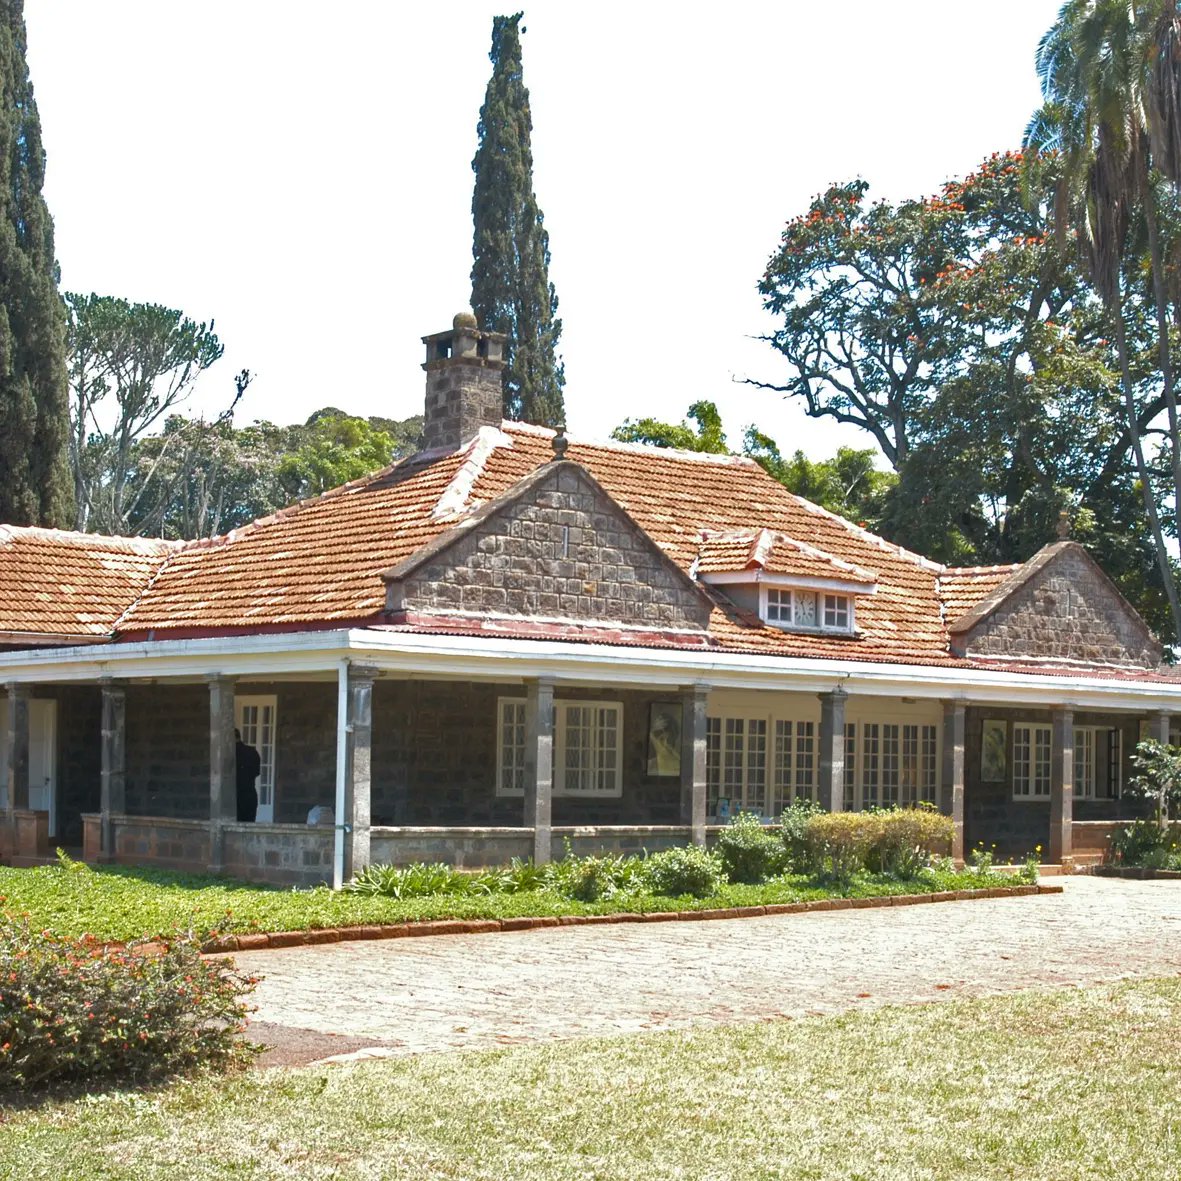 Take a look at the stunning Karen Blixen Museum grounds where we'll be screening King Solomon's  Mines on March 4th.
You can't afford to miss😍.
@promote_ke 
#KarenBlixenMuseum 
#outdoormovie #KarenBlixenMuseum